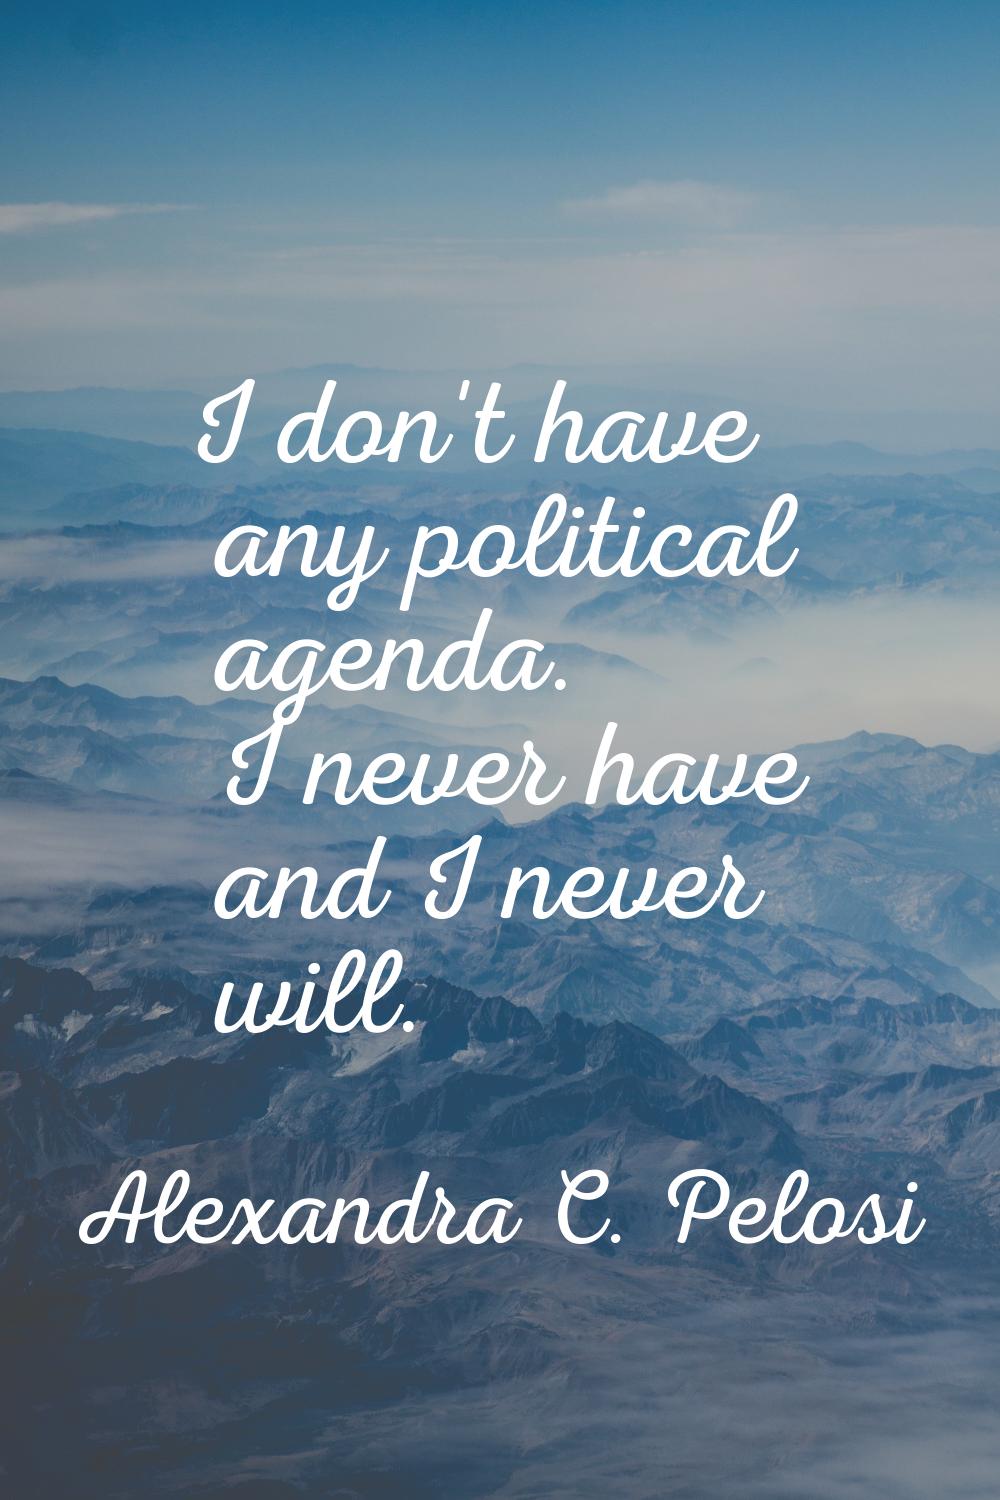 I don't have any political agenda. I never have and I never will.